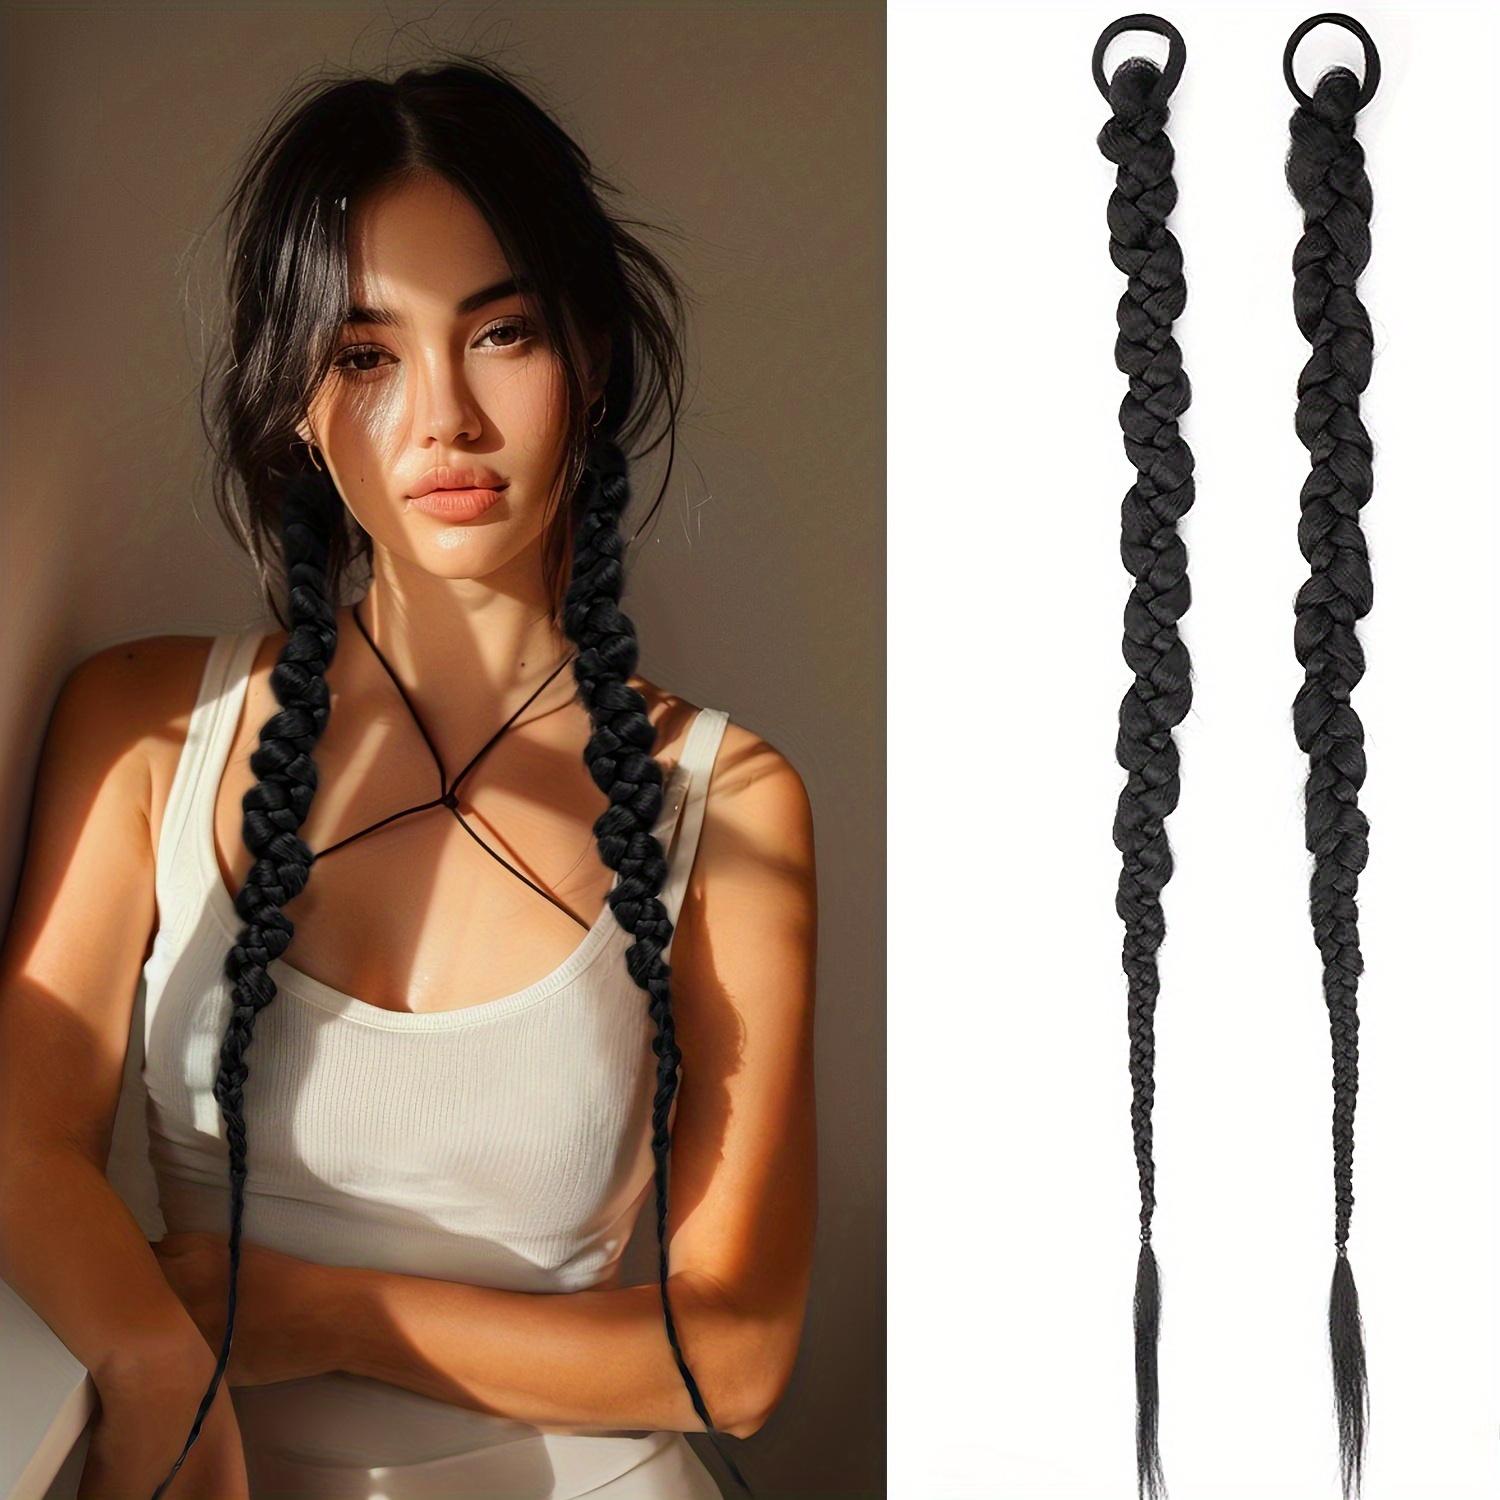 

2 Pcs Long Braided Ponytail Extension With Elastic Hair Tie Black Straight Wrap Around For Women Ponytail Soft Synthetic Hairpiece Hair Piece For Daily Wear 24 Inch Hair Accessories